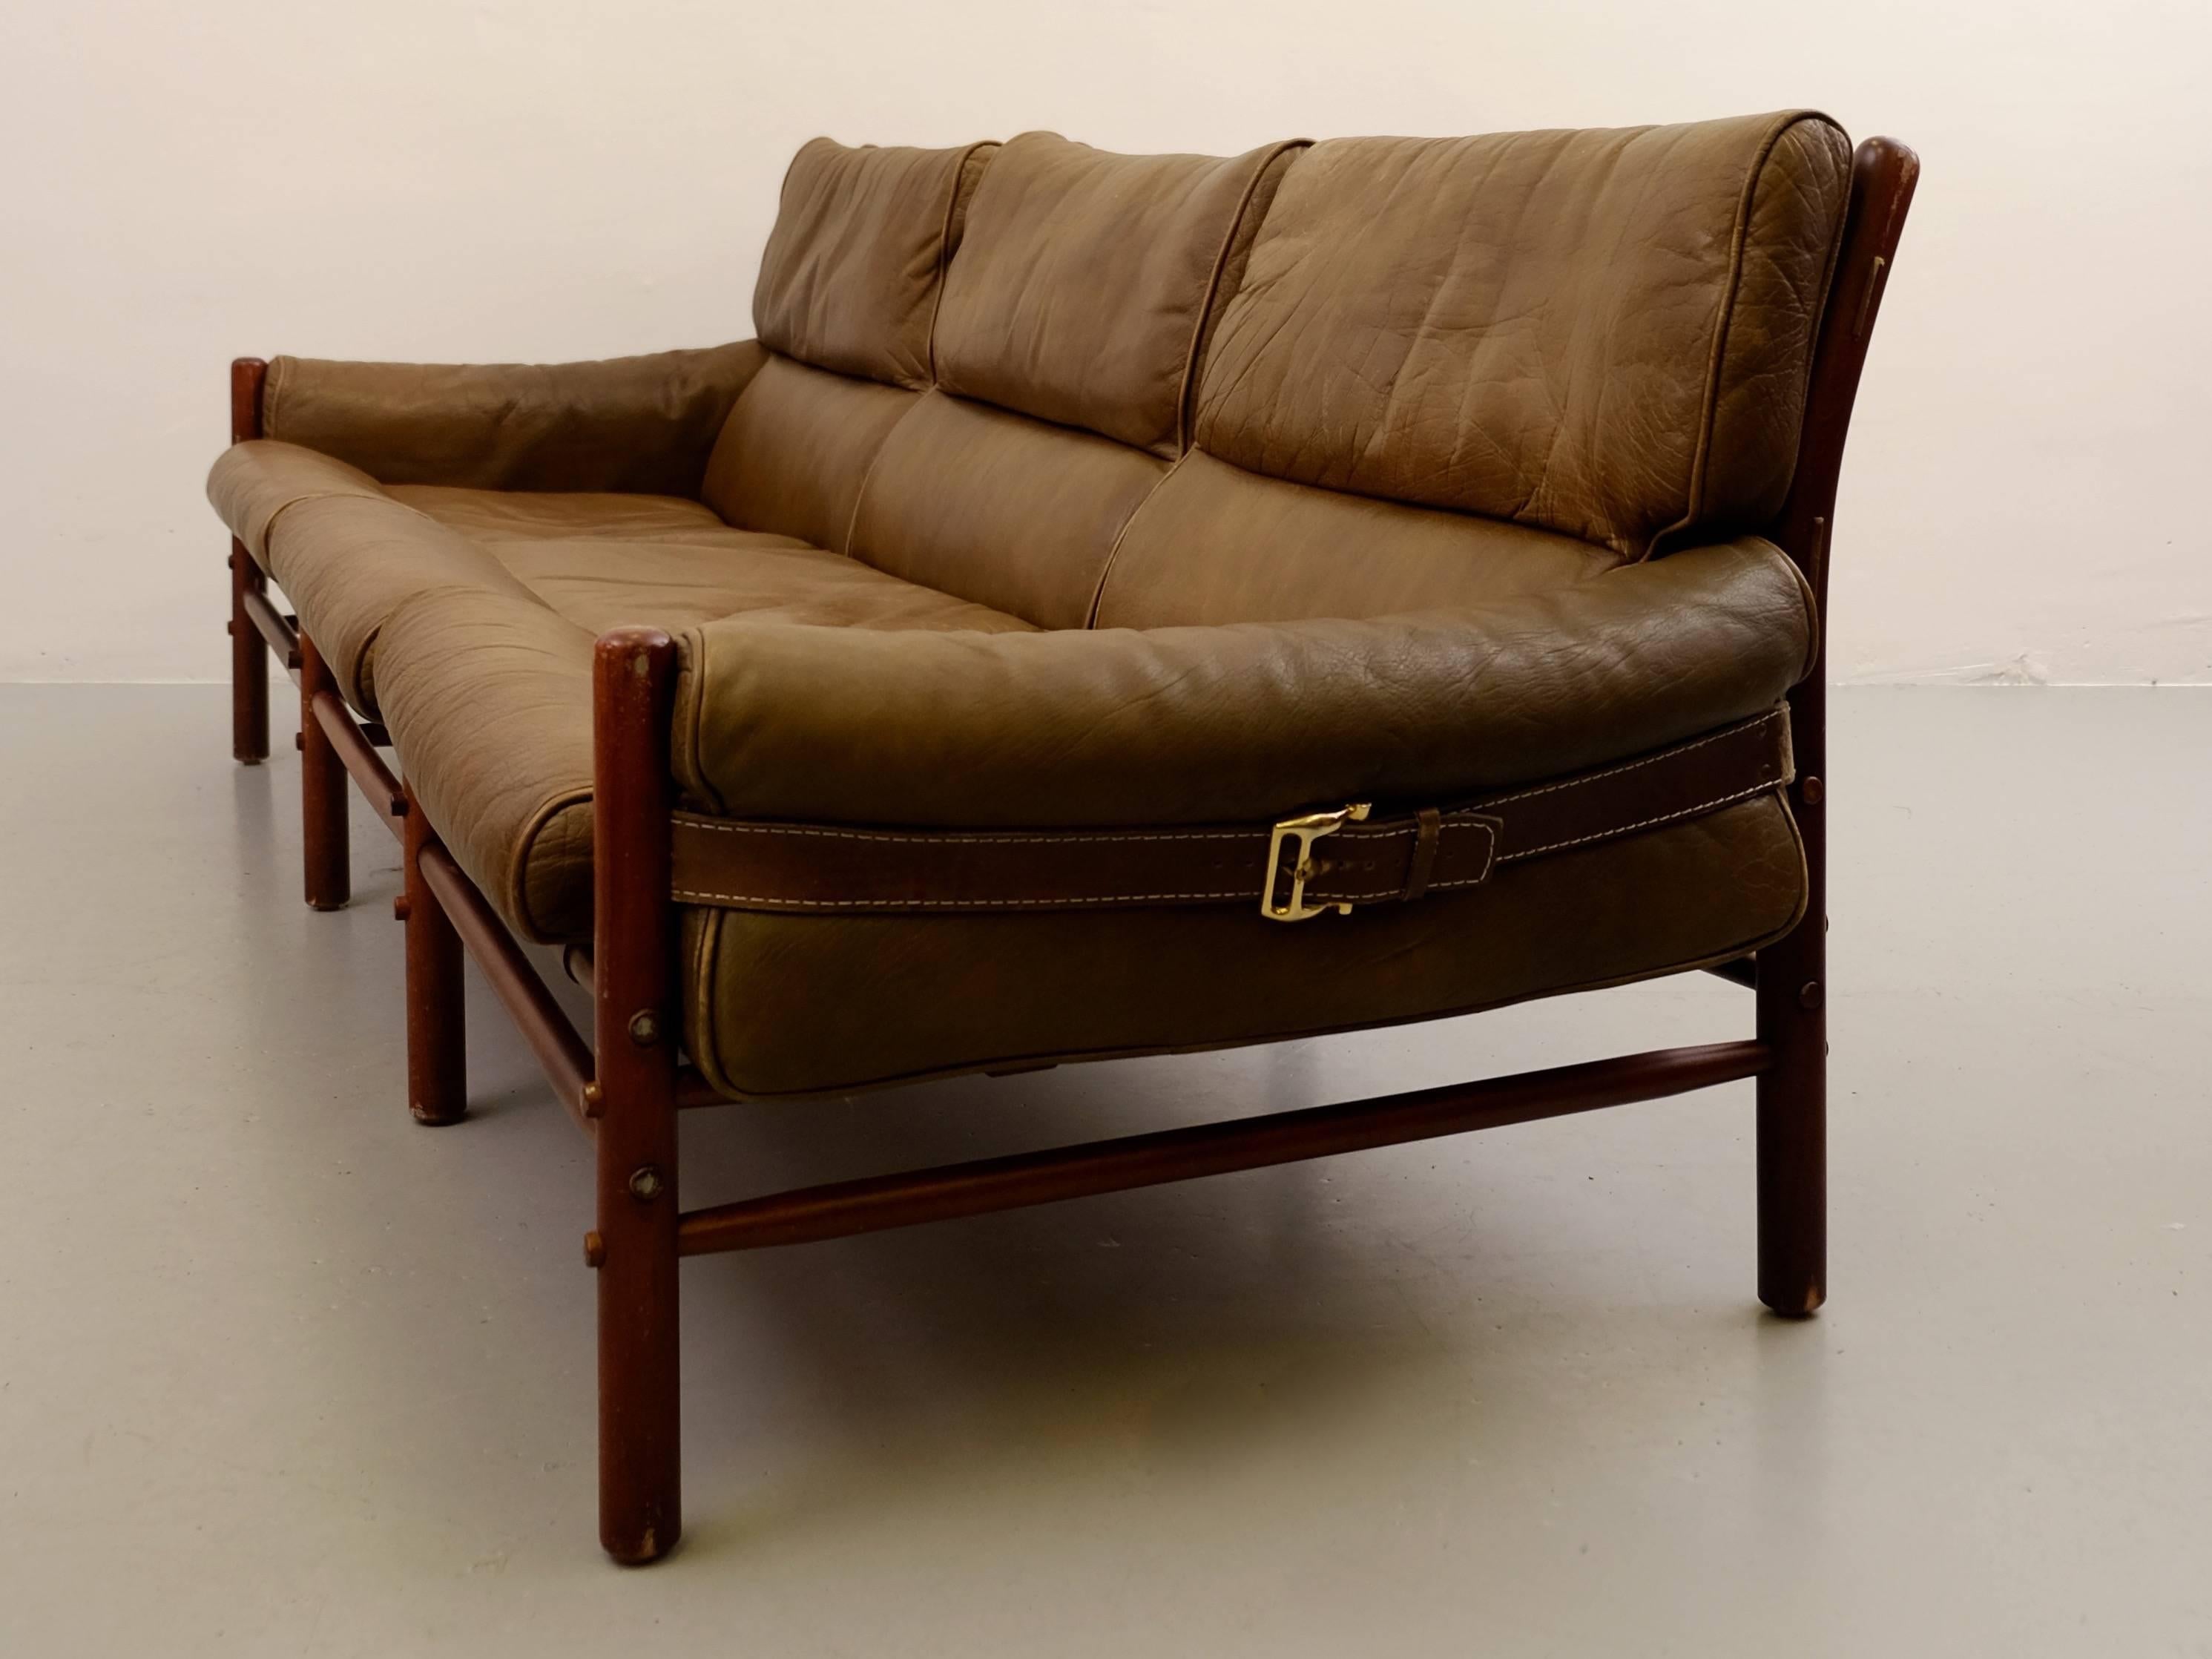 Original brown leather three-seat sofa model Kontiki designed by Arne Norell. Produced by Arne Norell AB in Aneby, Sweden.
Excellent condition!
 